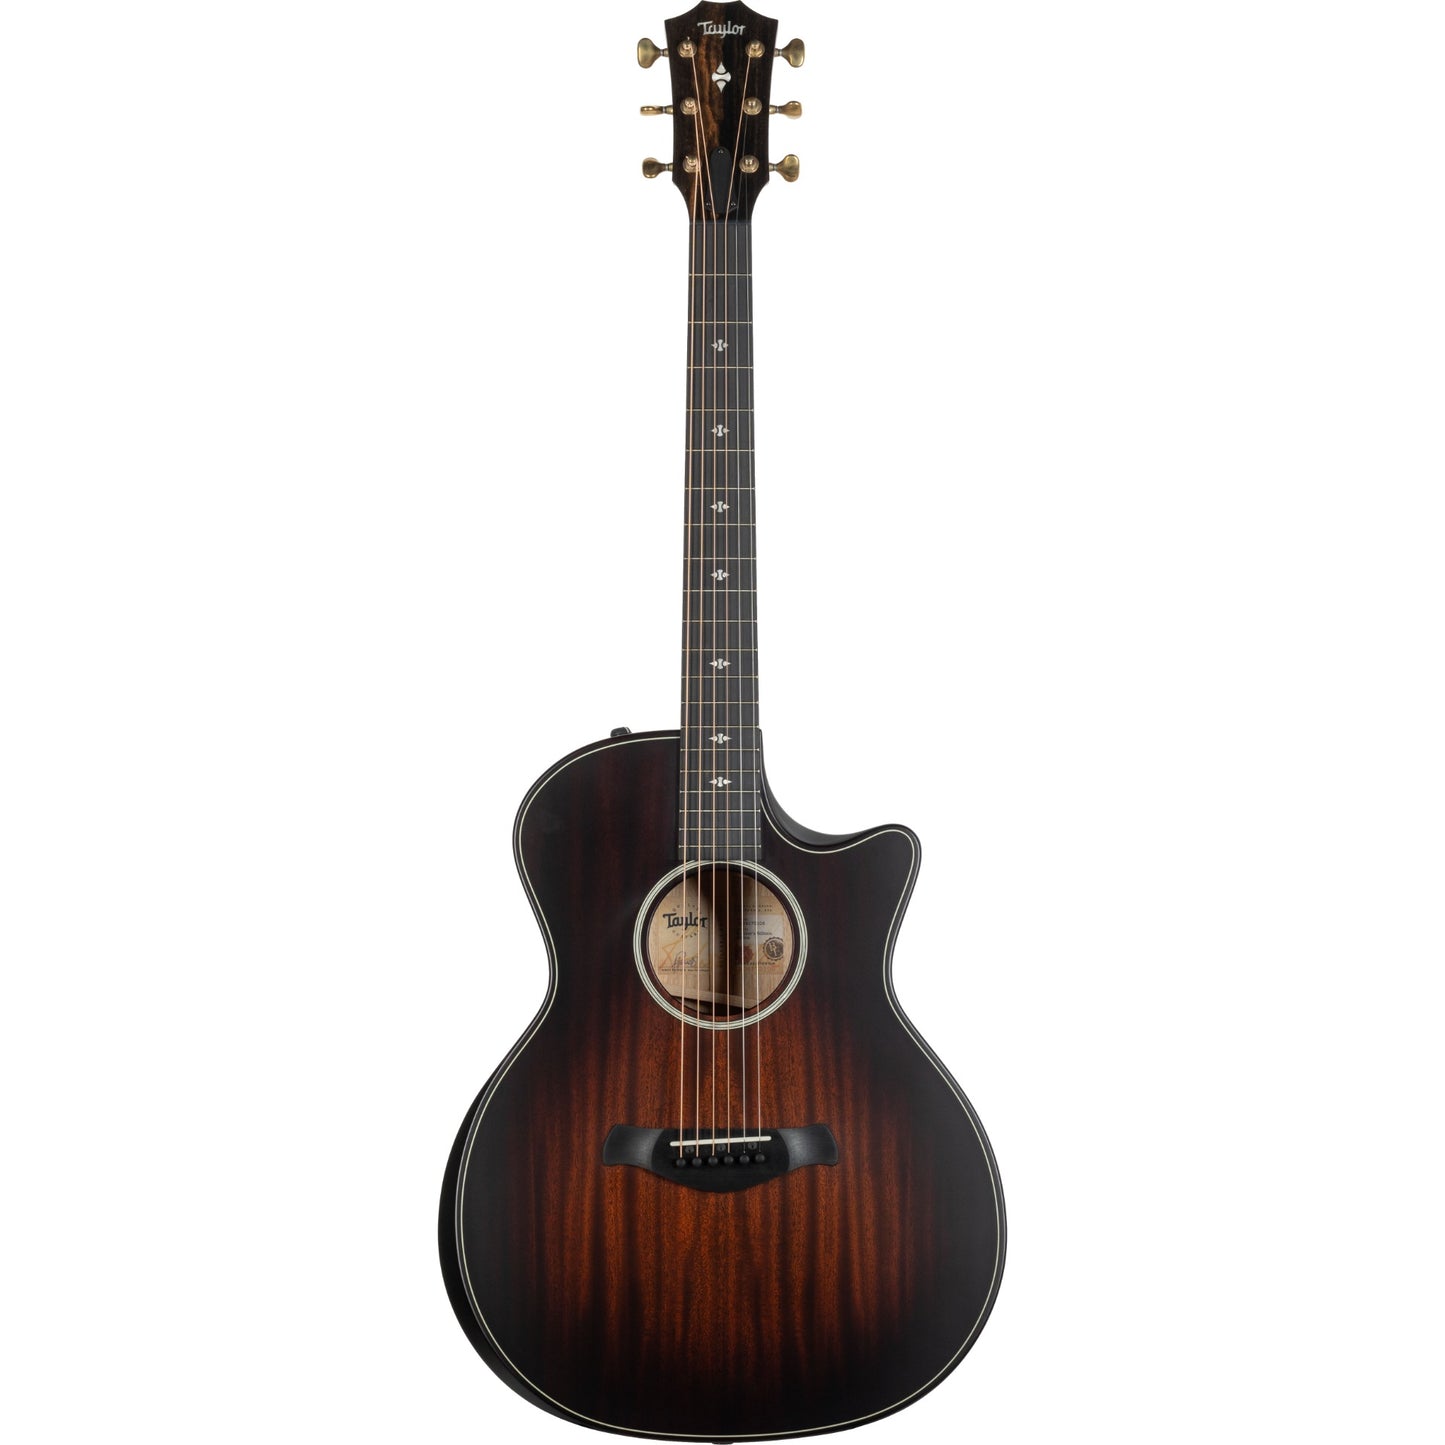 Taylor 324ce Builder’s Edition Acoustic Electric Guitar - Shaded Edgeburst